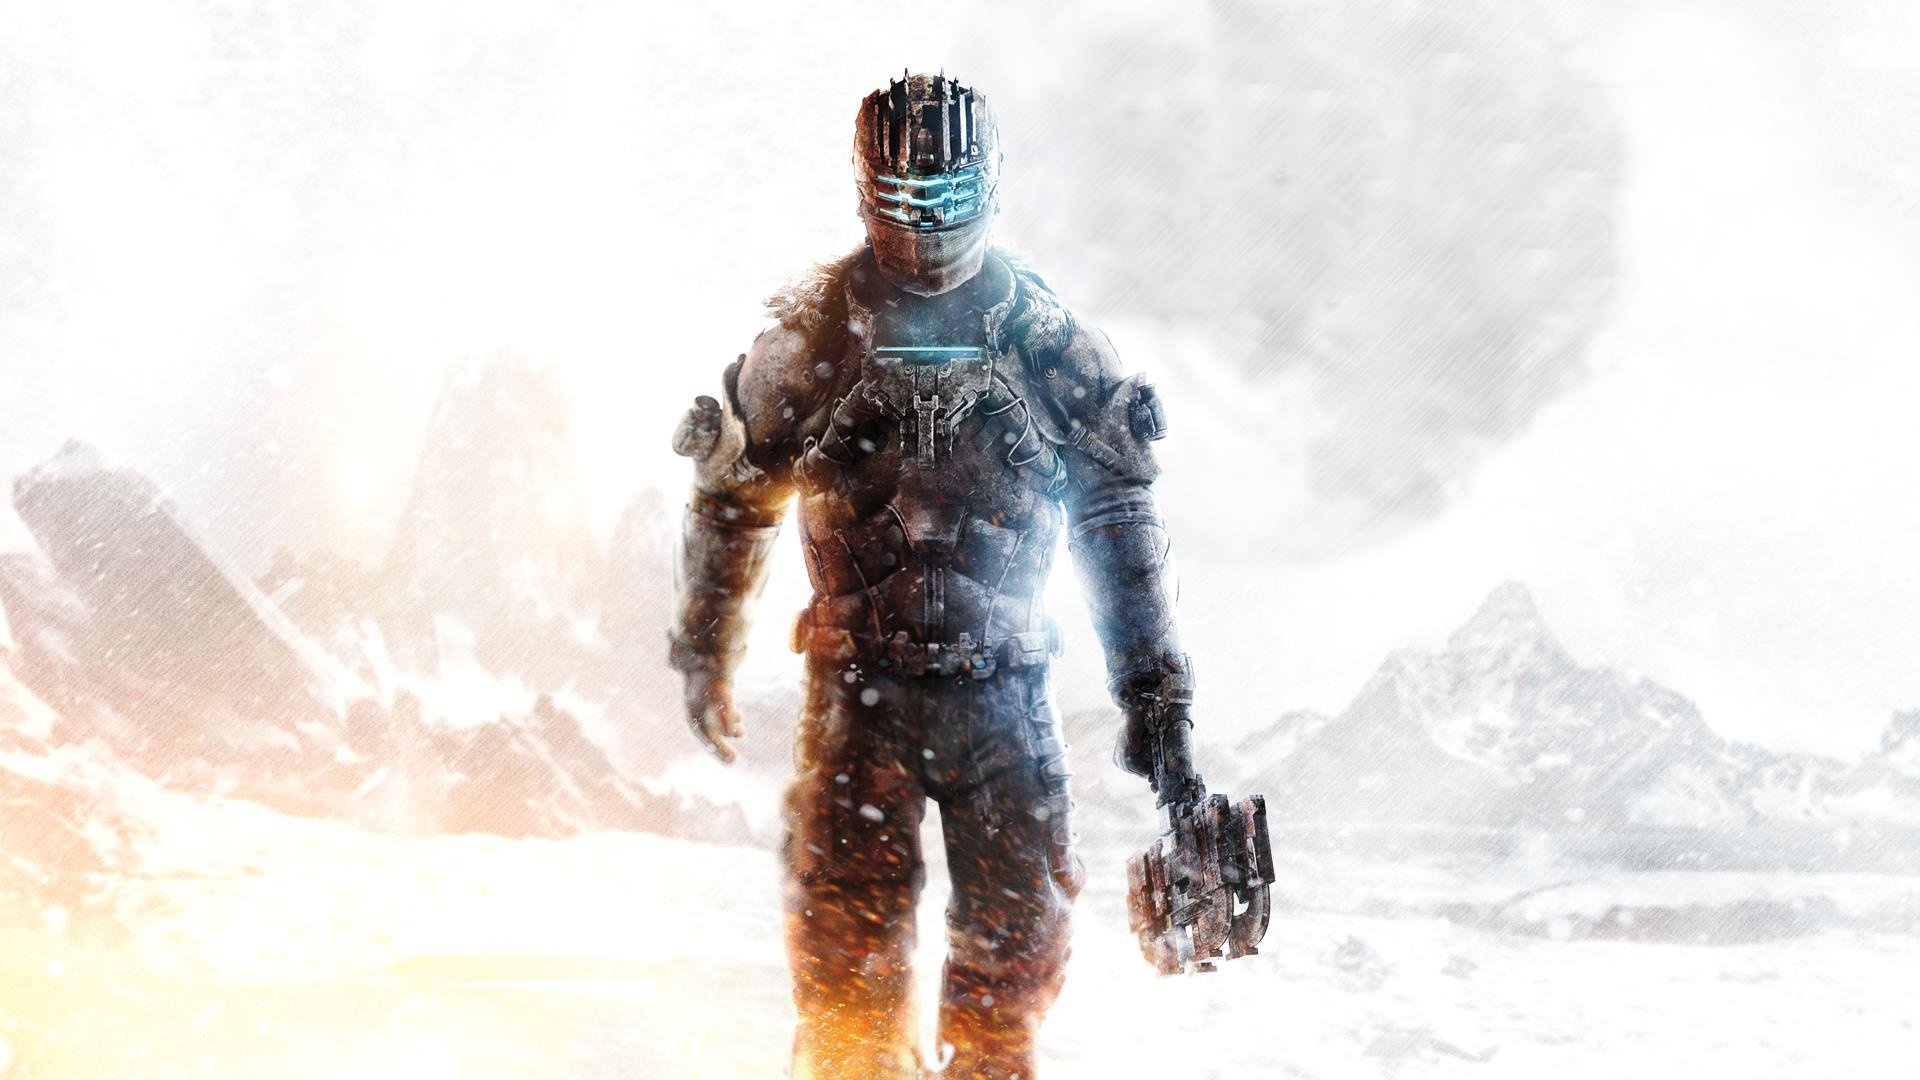 Dead Space: Listed as #12 in IGN's  "Top 25 PlayStation 3 games". 1920x1080 Full HD Wallpaper.